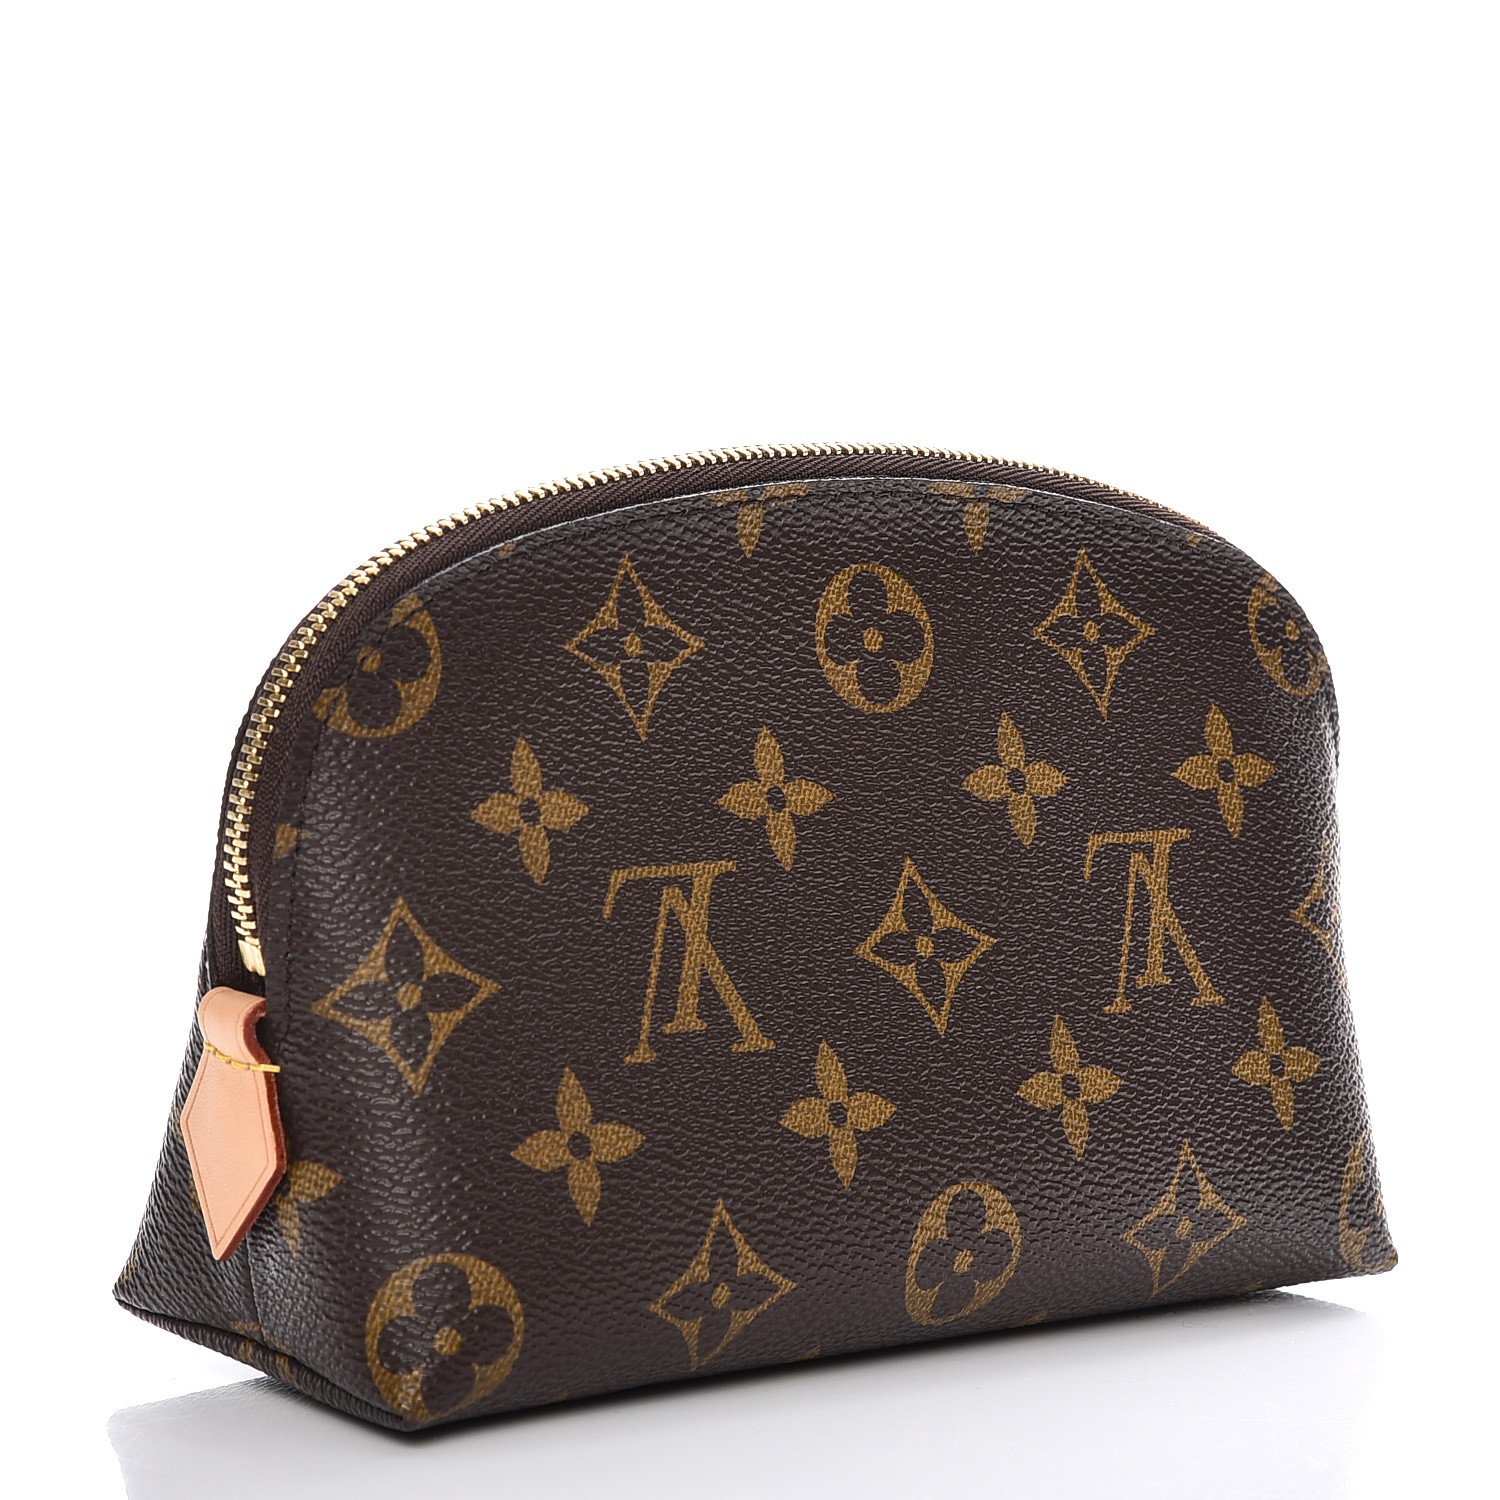 Louis Vuitton SOLD OUT Monogram Giant Raffia Toiletry 26 Cosmetic Bag